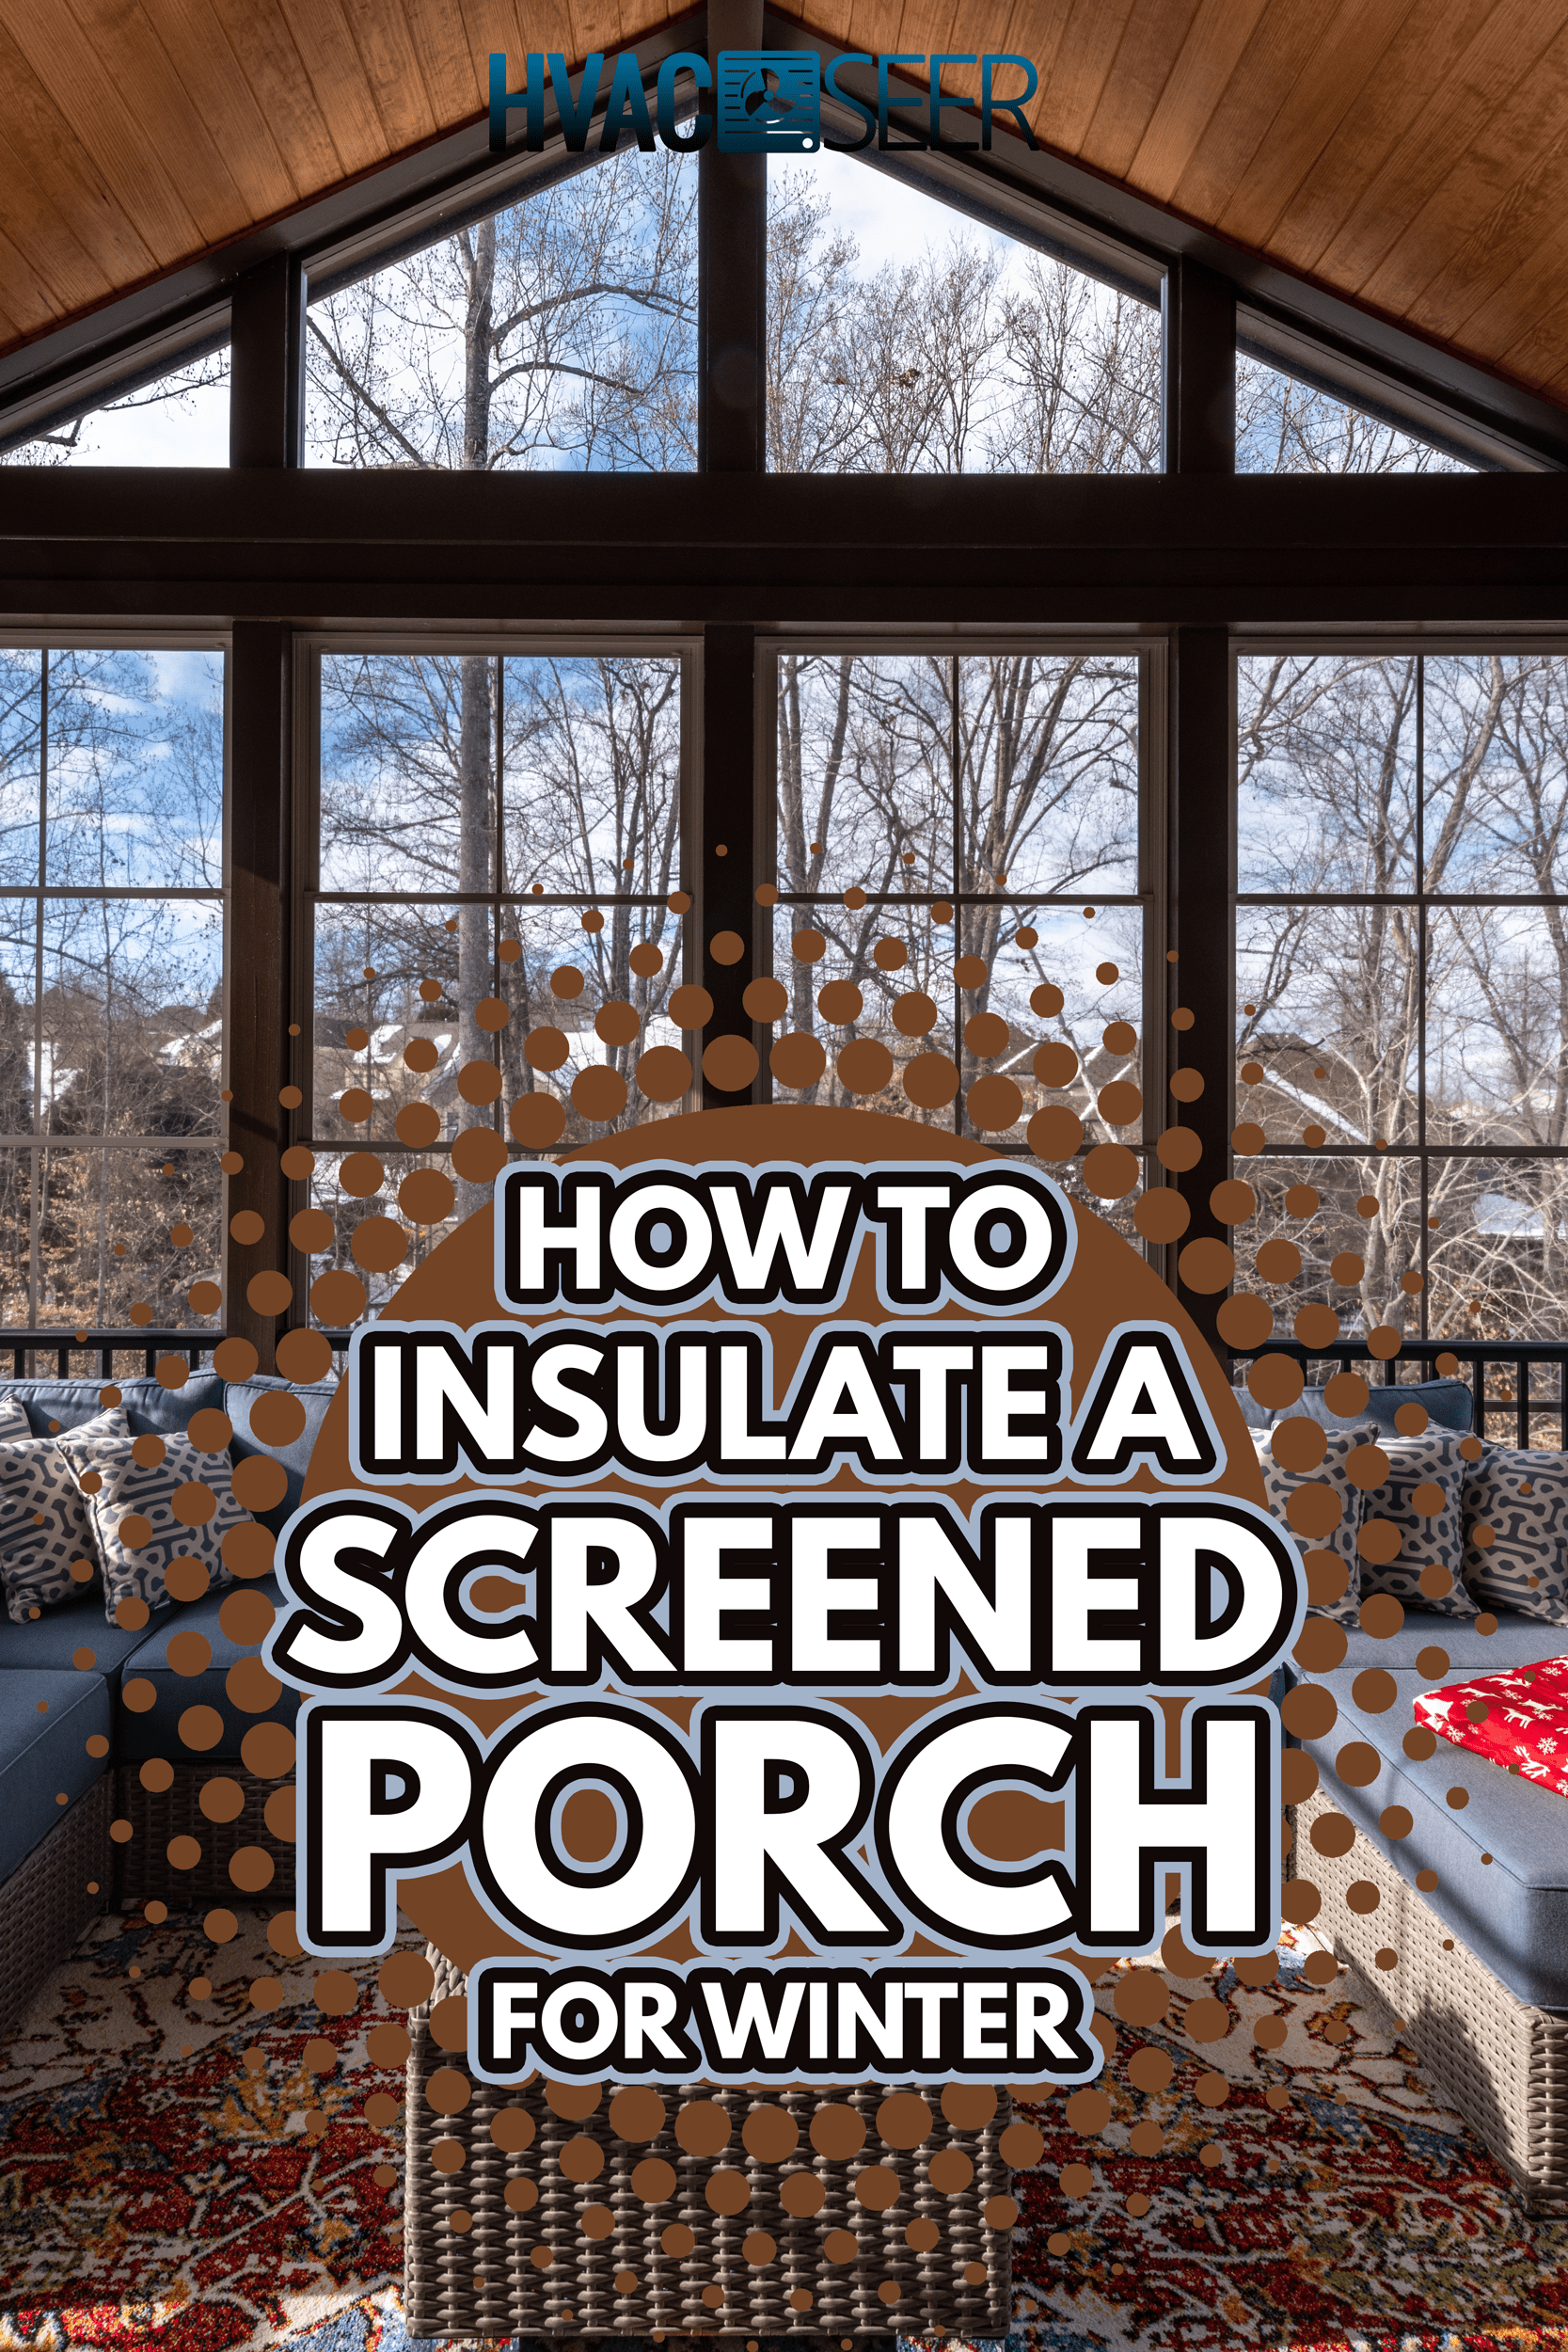 Cozy screened porch winter during Holidays season, snowy roofs and woods in the background - How To Insulate A Screened Porch For Winter